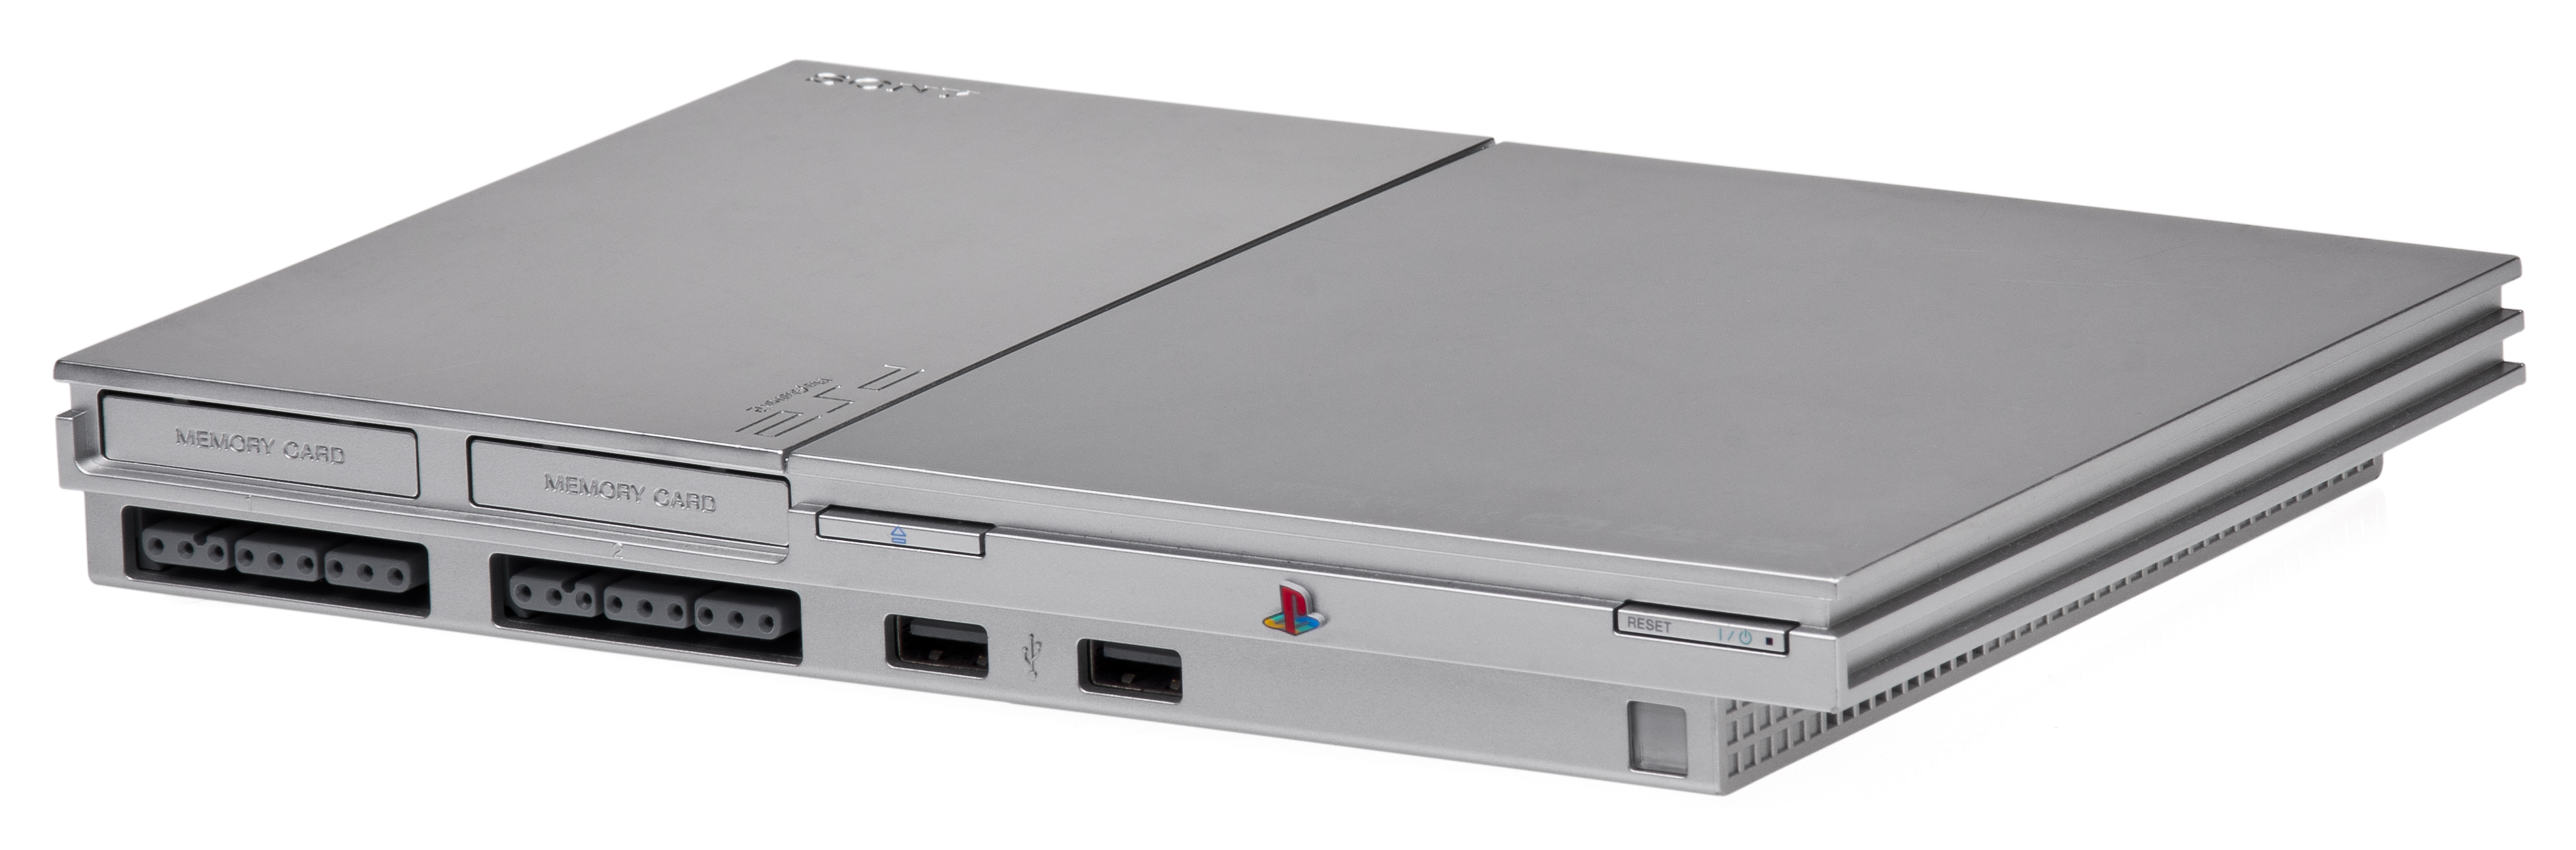 Replicate face to many ps2. Sony PLAYSTATION 2 ps2. PLAYSTATION 2 Slim 7000. Ps2 Slim. Ps2 Slim 2004.